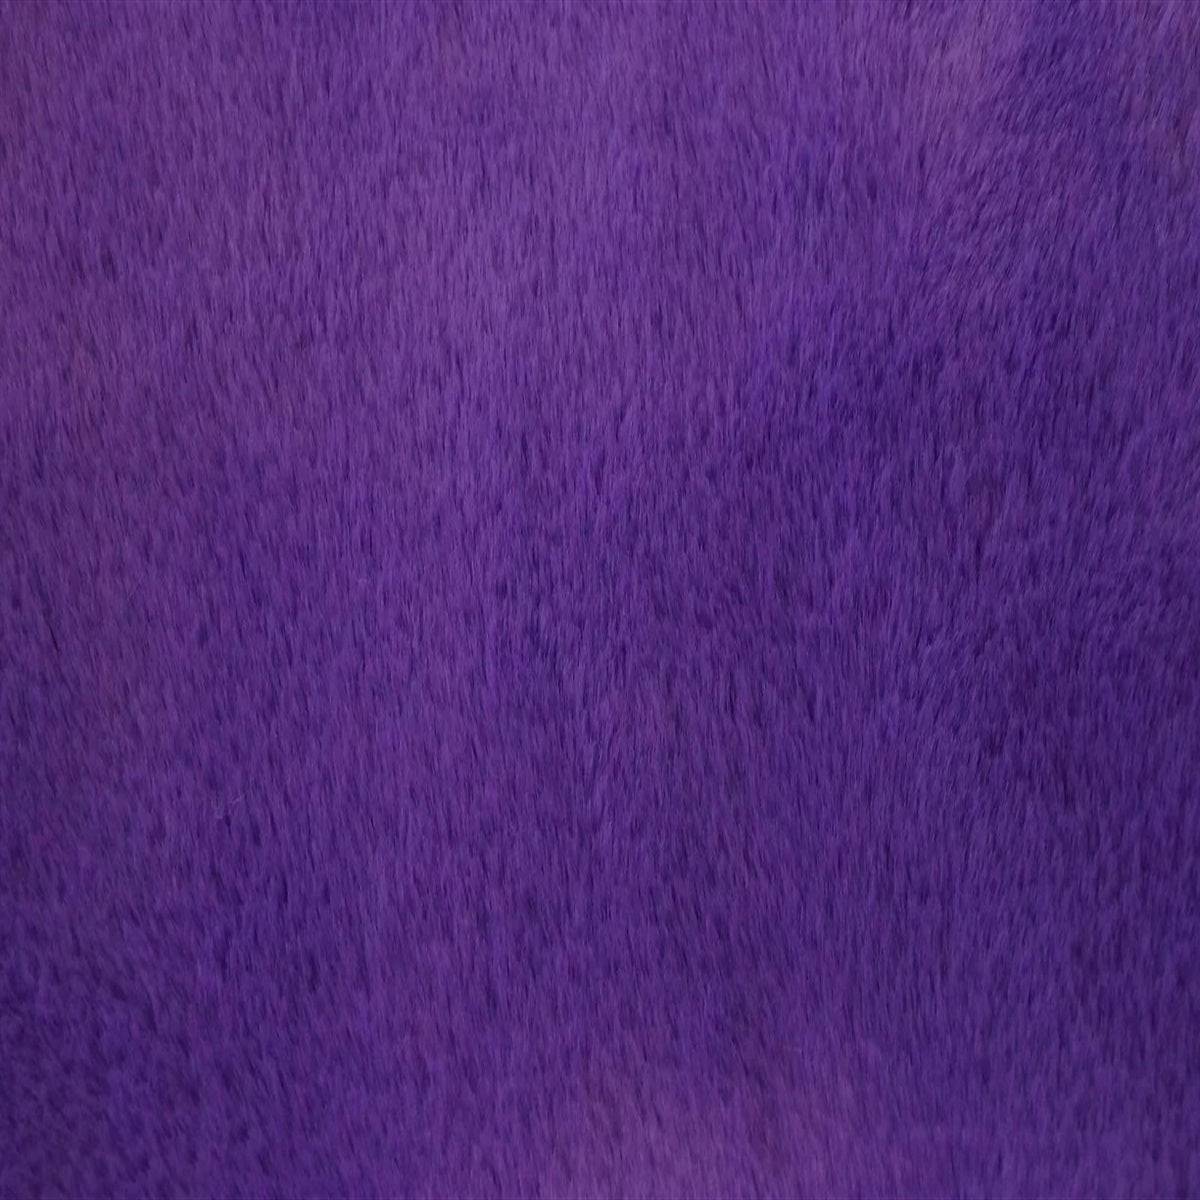 Bunny Thick Minky Fabric By The Roll (20 Yards)ICE FABRICSICE FABRICSPurpleBy The Yard (60 inches Wide)Bunny Thick Minky Fabric By The Roll (20 Yards) ICE FABRICS Purple